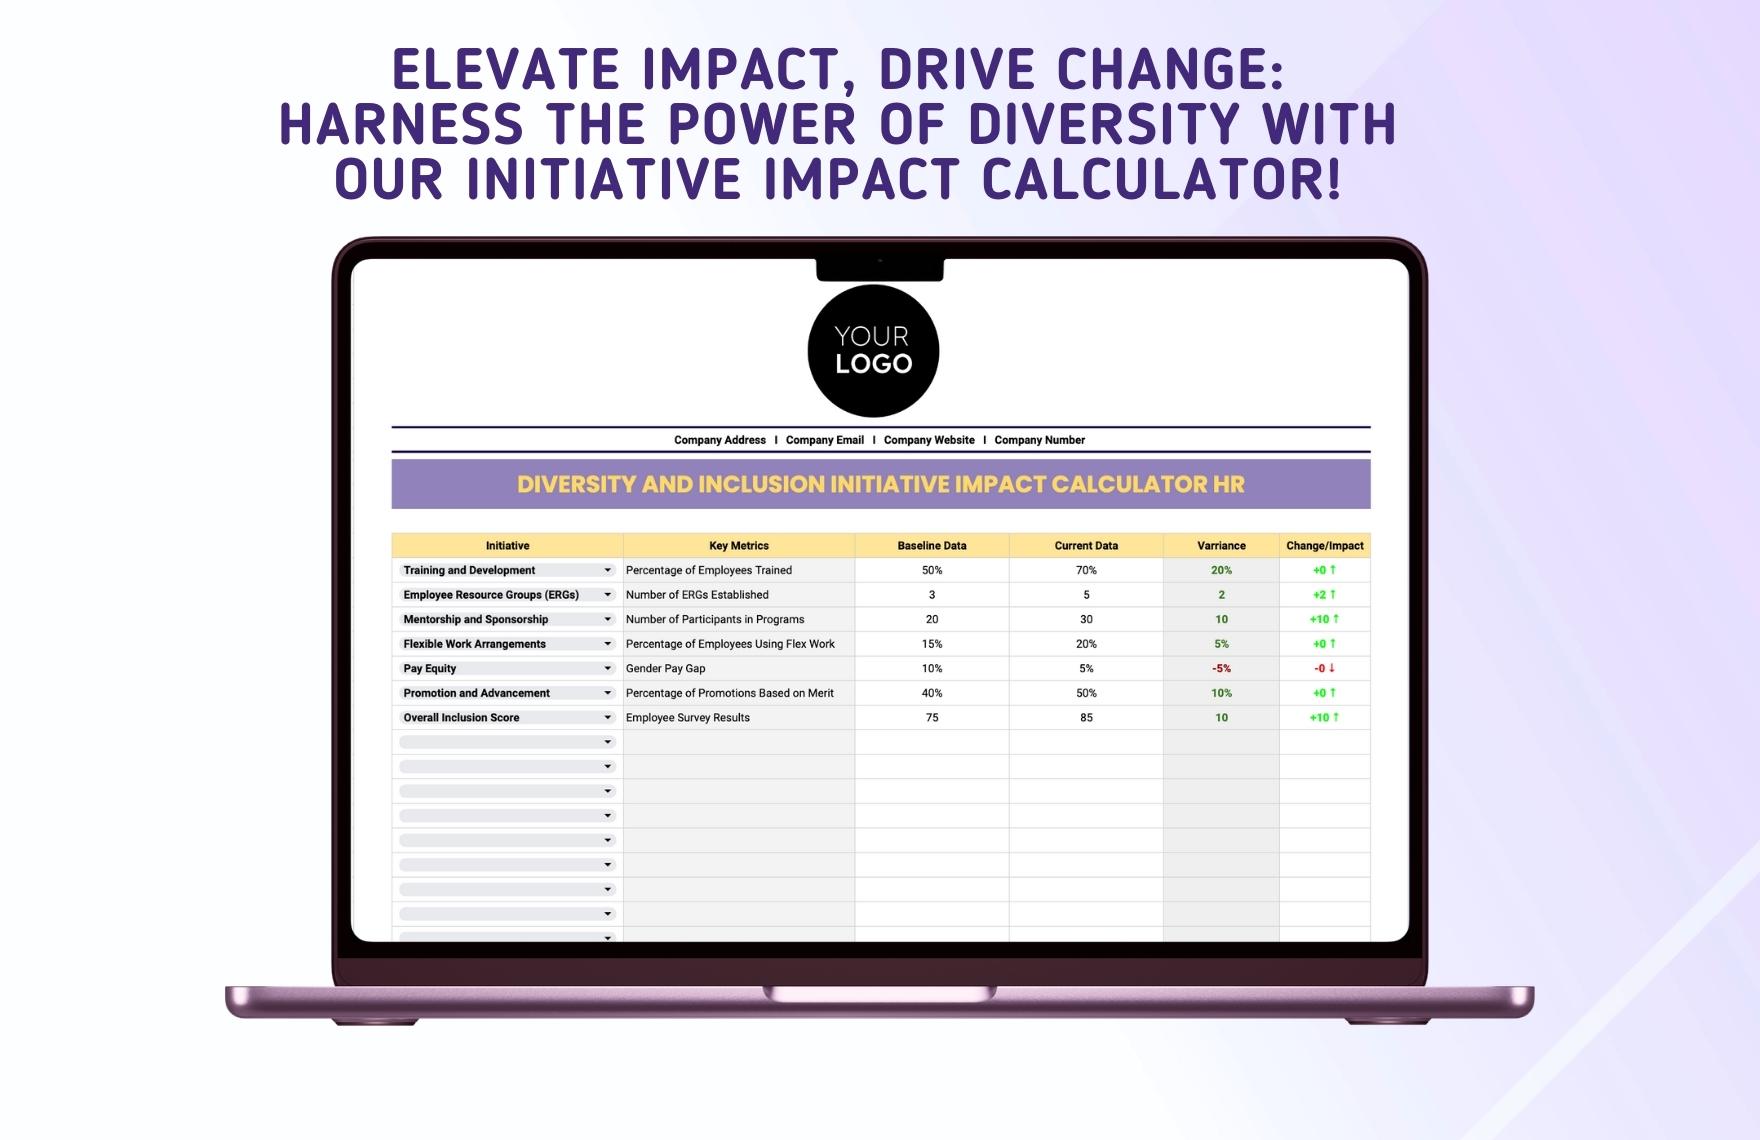 Diversity and Inclusion Initiative Impact Calculator HR Template